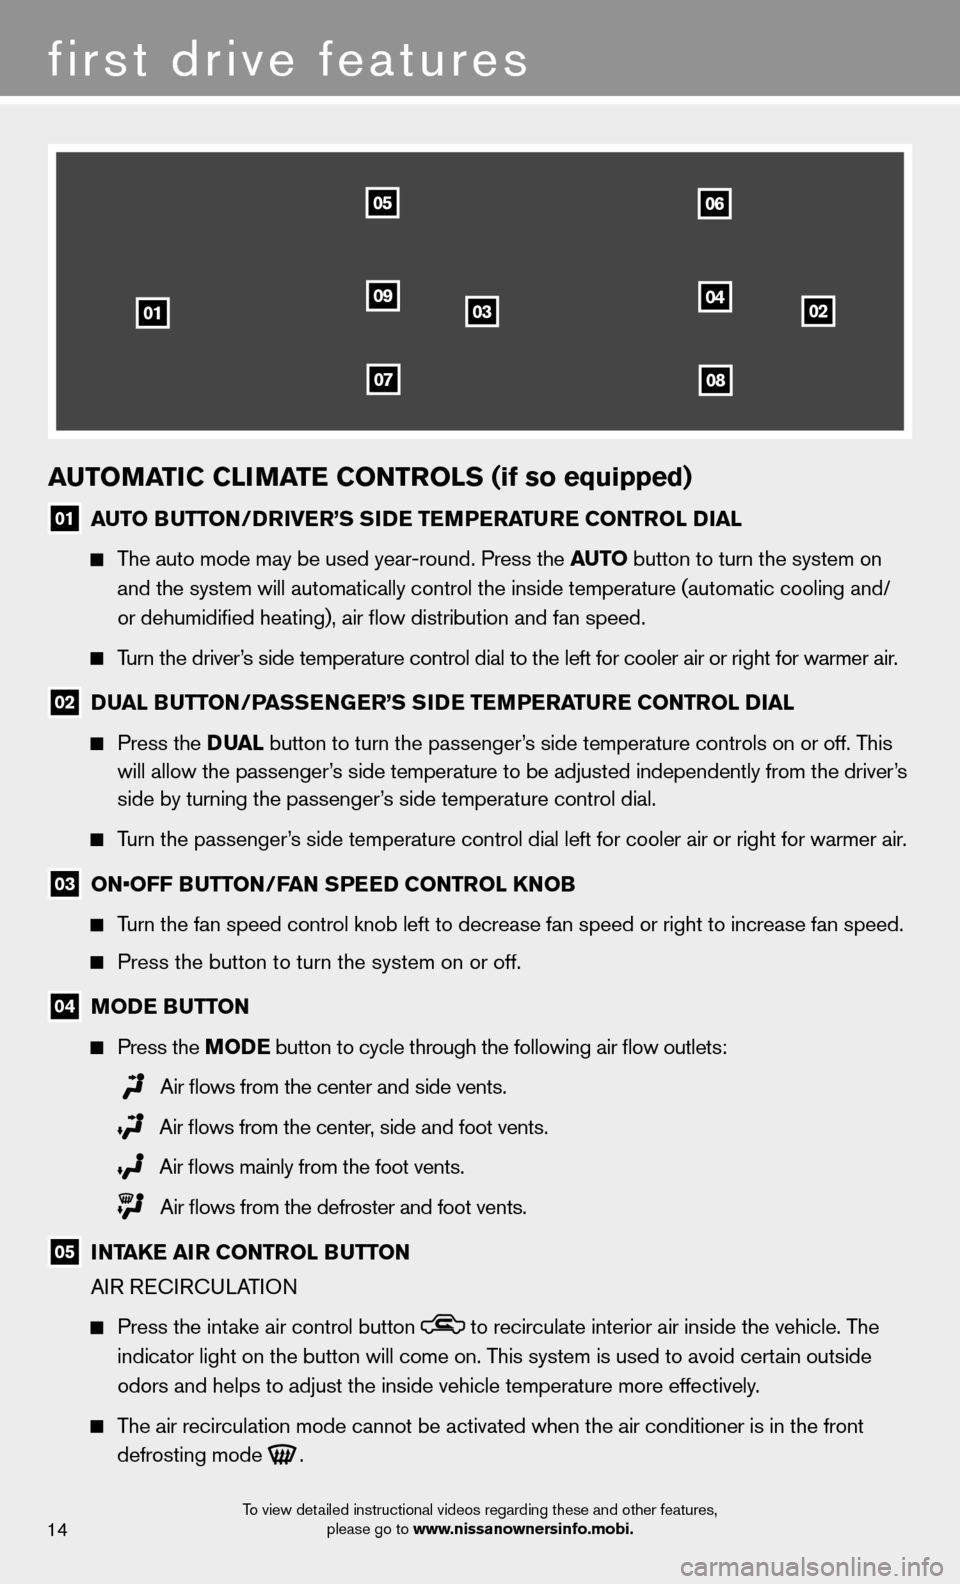 NISSAN MURANO 2013 2.G Quick Reference Guide AUTOMATIC CLIMATE CONTROLS (if so equipped)
01 AUTO BUTTON/DRIVER’S SIDE TEMPERATURE CONTROL DIAL
  
  The auto mode may be used year-round. Press the  AUTO button to turn the system on 
      and t